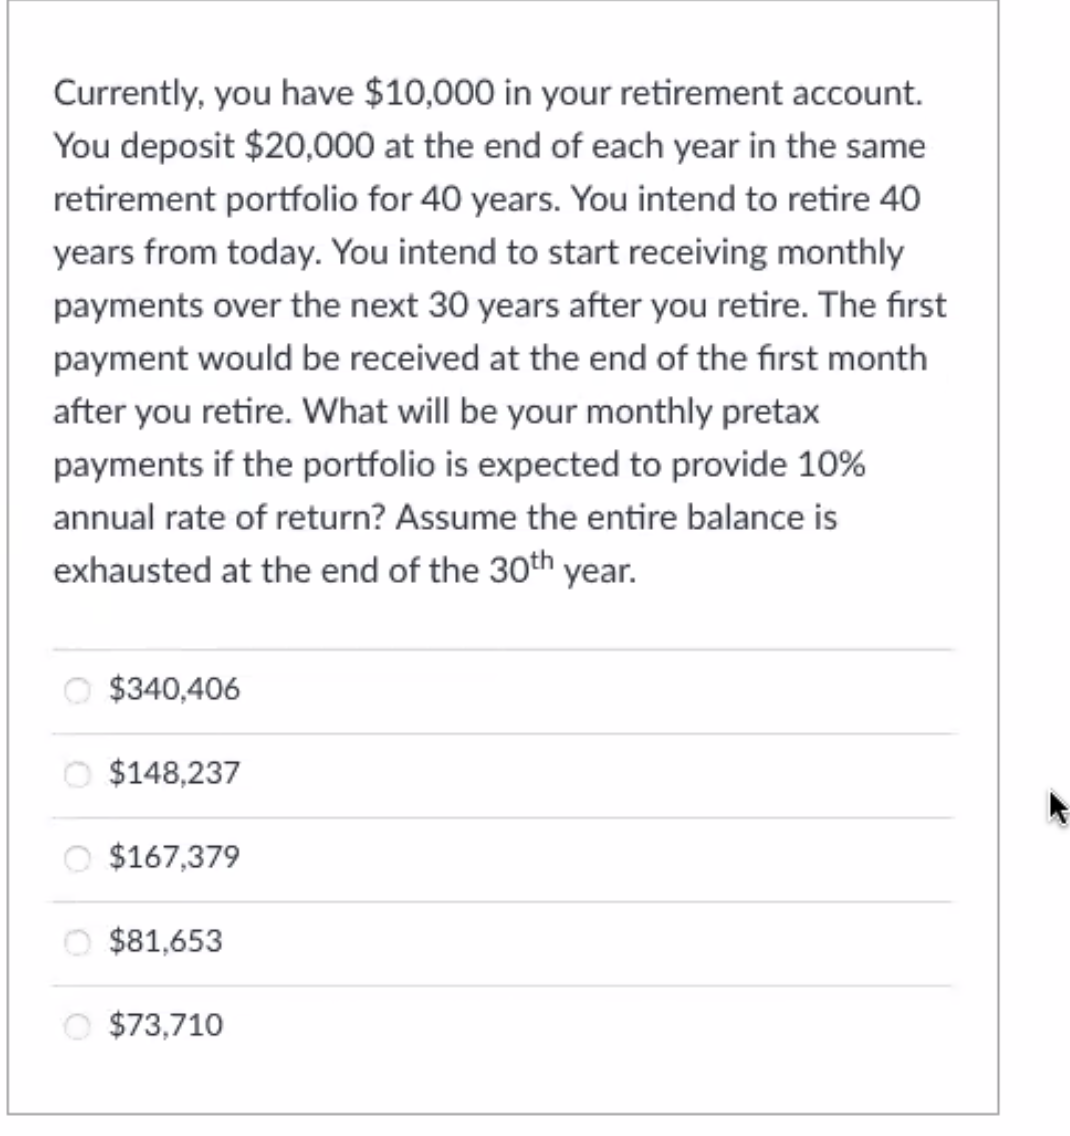 Currently, you have $10,000 in your retirement account.
You deposit $20,000 at the end of each year in the same
retirement portfolio for 40 years. You intend to retire 40
years from today. You intend to start receiving monthly
payments over the next 30 years after you retire. The first
payment would be received at the end of the first month
after you retire. What will be your monthly pretax
payments if the portfolio is expected to provide 10%
annual rate of return? Assume the entire balance is
exhausted at the end of the 30th year.
O $340,406
O $148,237
O $167,379
O $81,653
O $73,710
